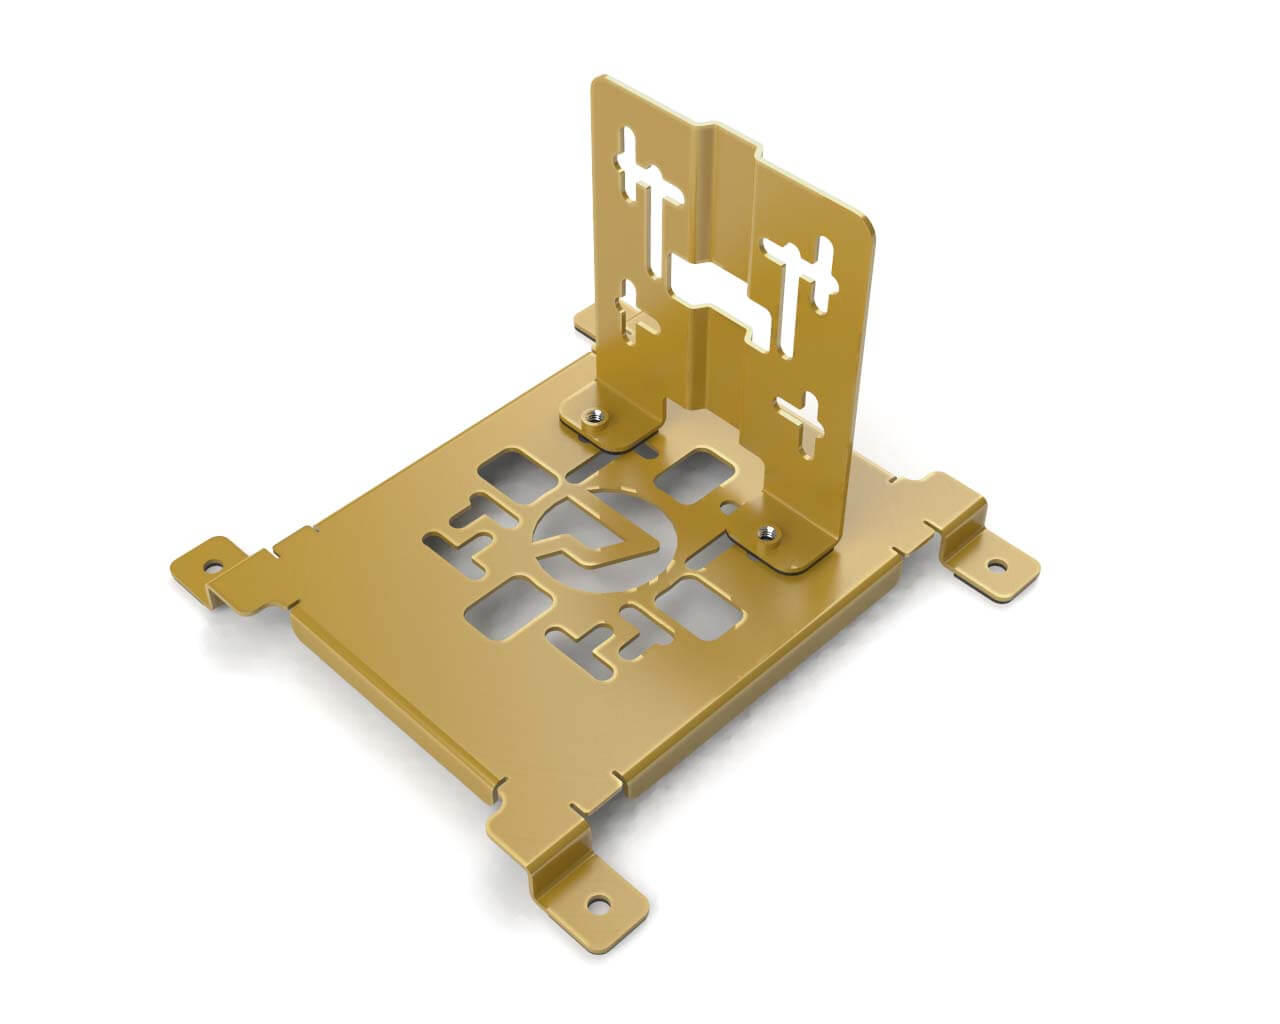 PrimoChill SX Universal Spider Mount Bracket Kit - 140mm Series - PrimoChill - KEEPING IT COOL Candy Gold